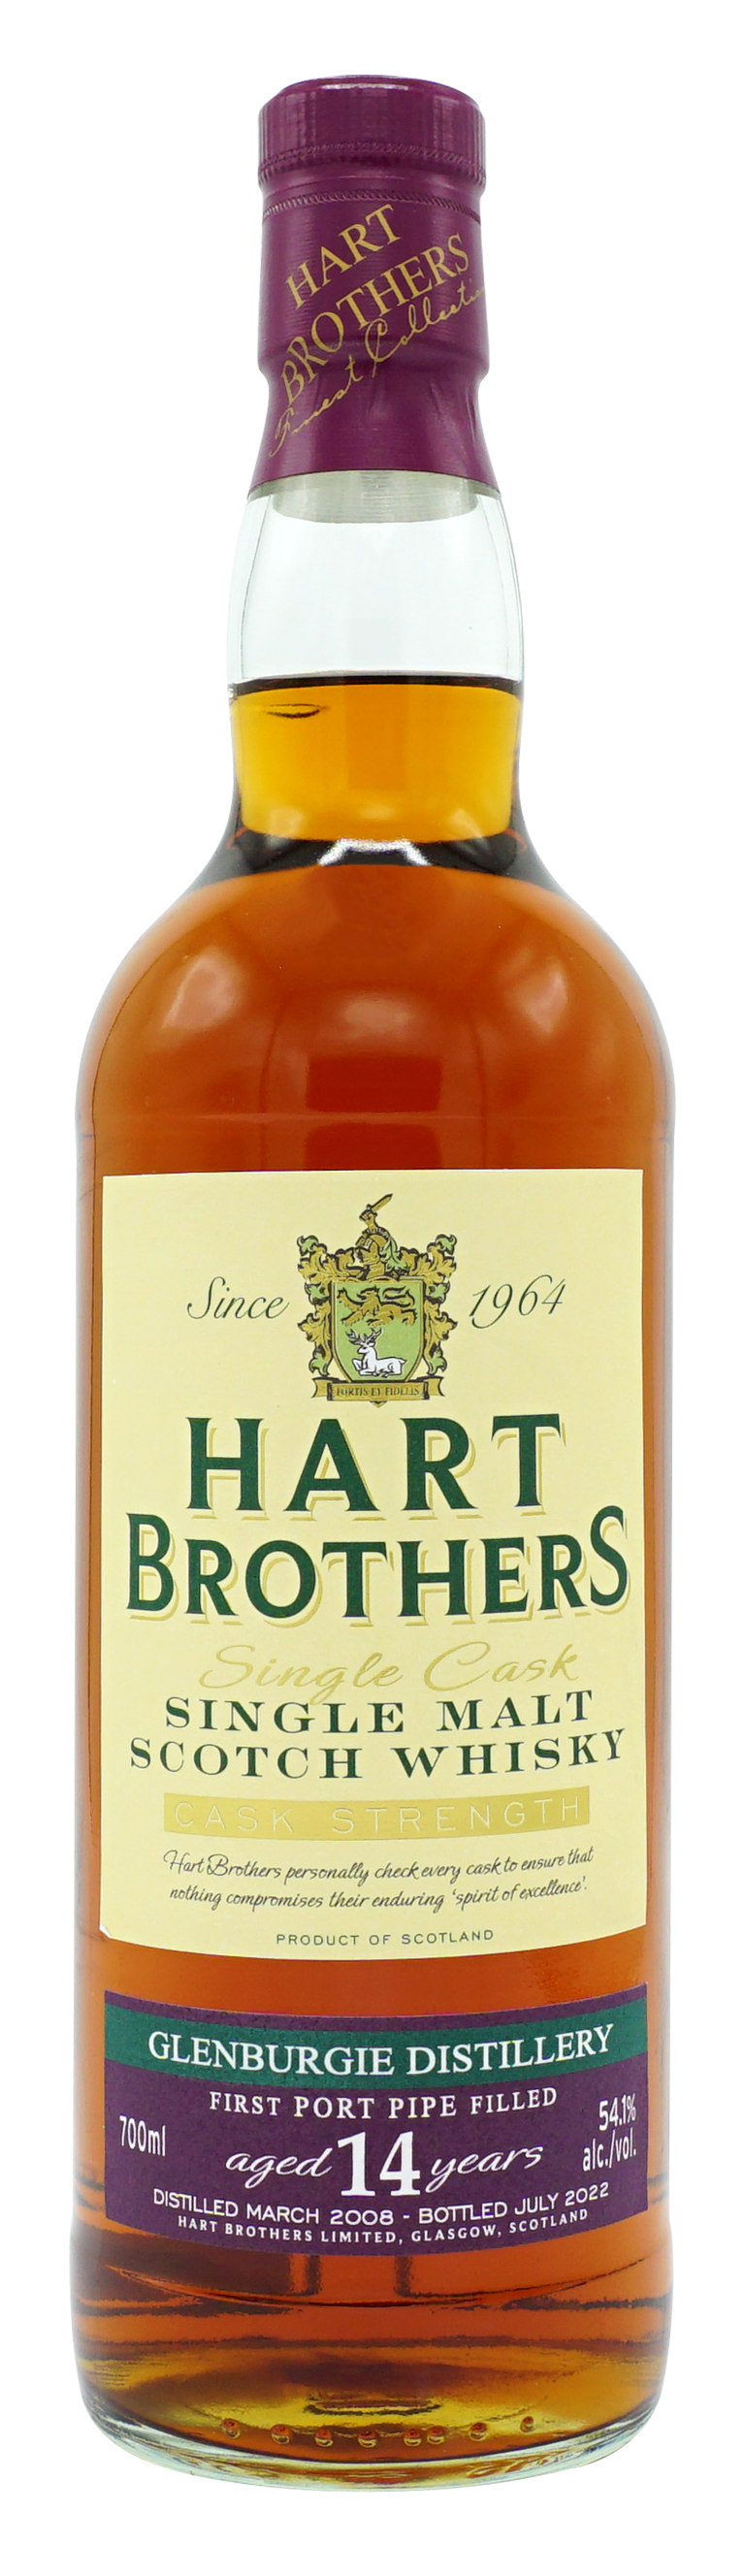 hart-brothers-glenburgie-14-years-70cl-541